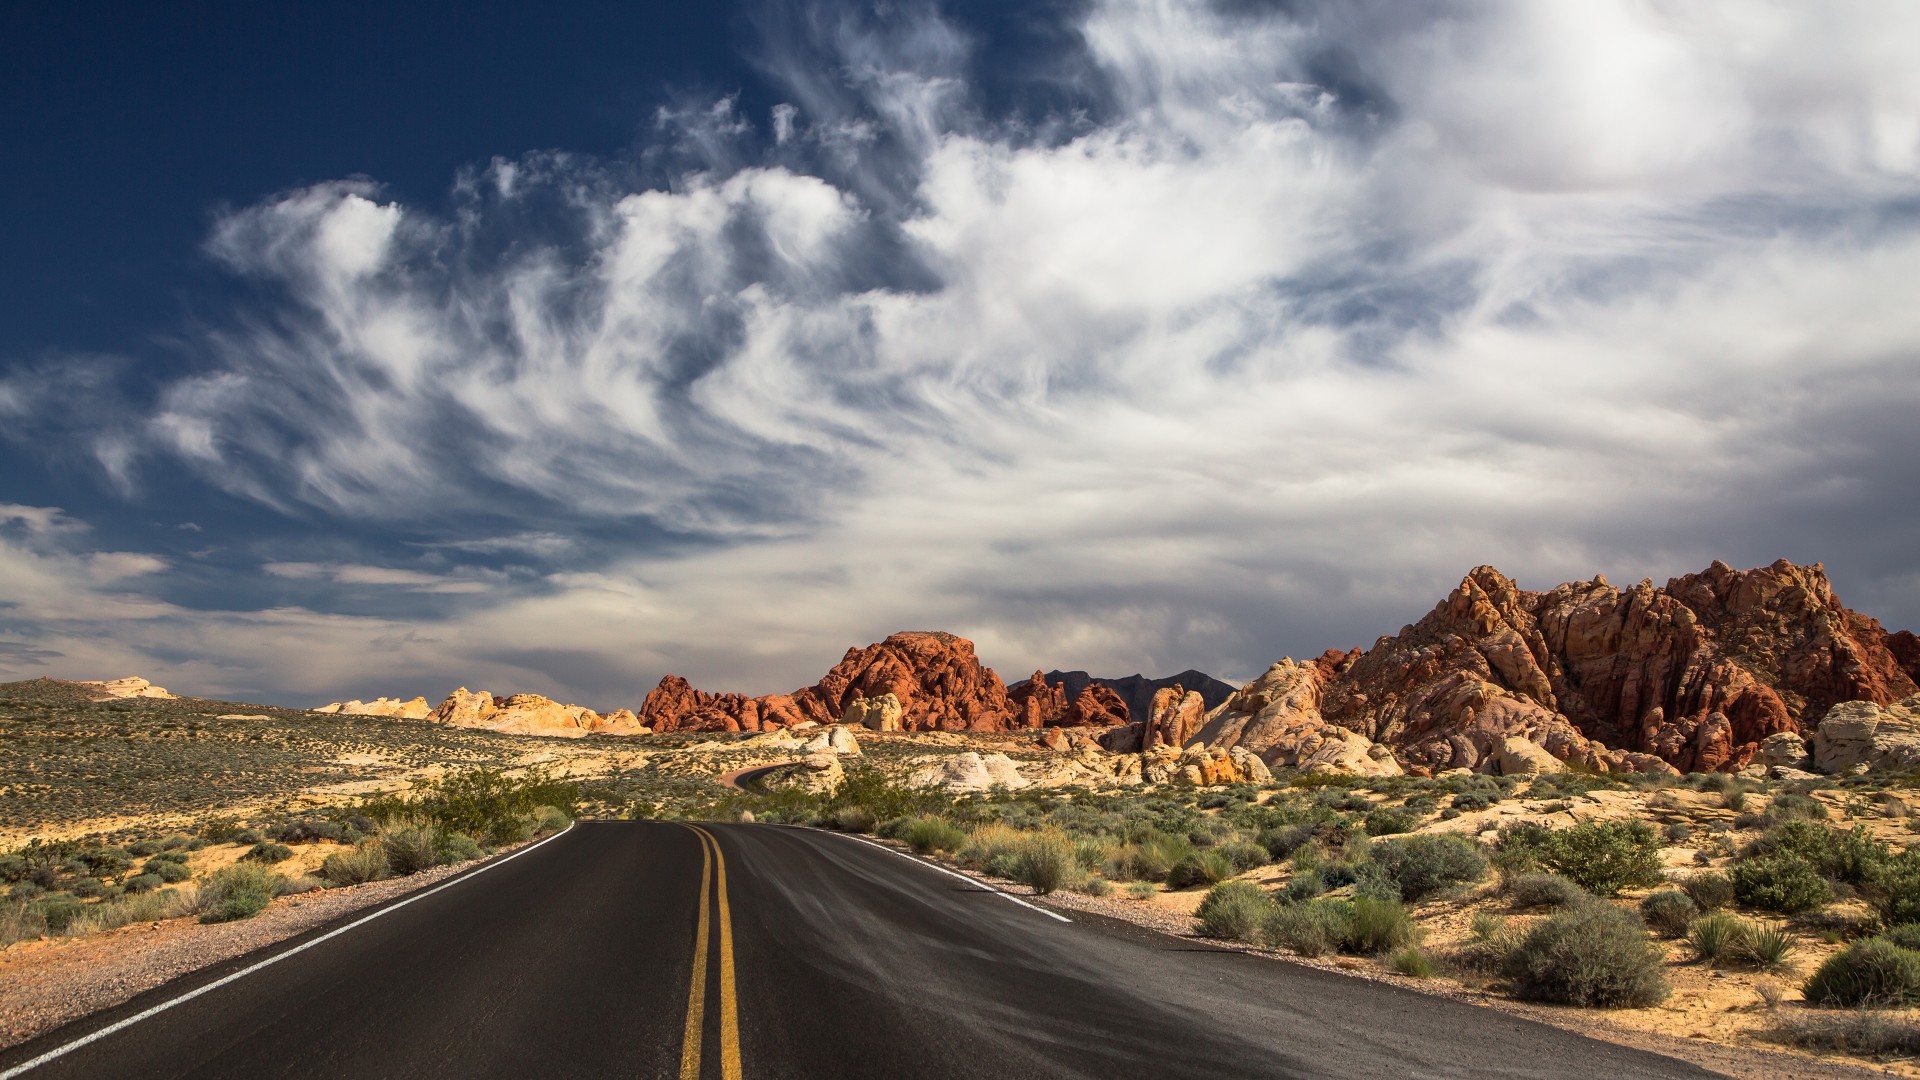 Las Vegas, 4k, HD wallpaper, 5k, the Valley of Fire State Park, road, clouds, mountain, valley, day, sky (horizontal)